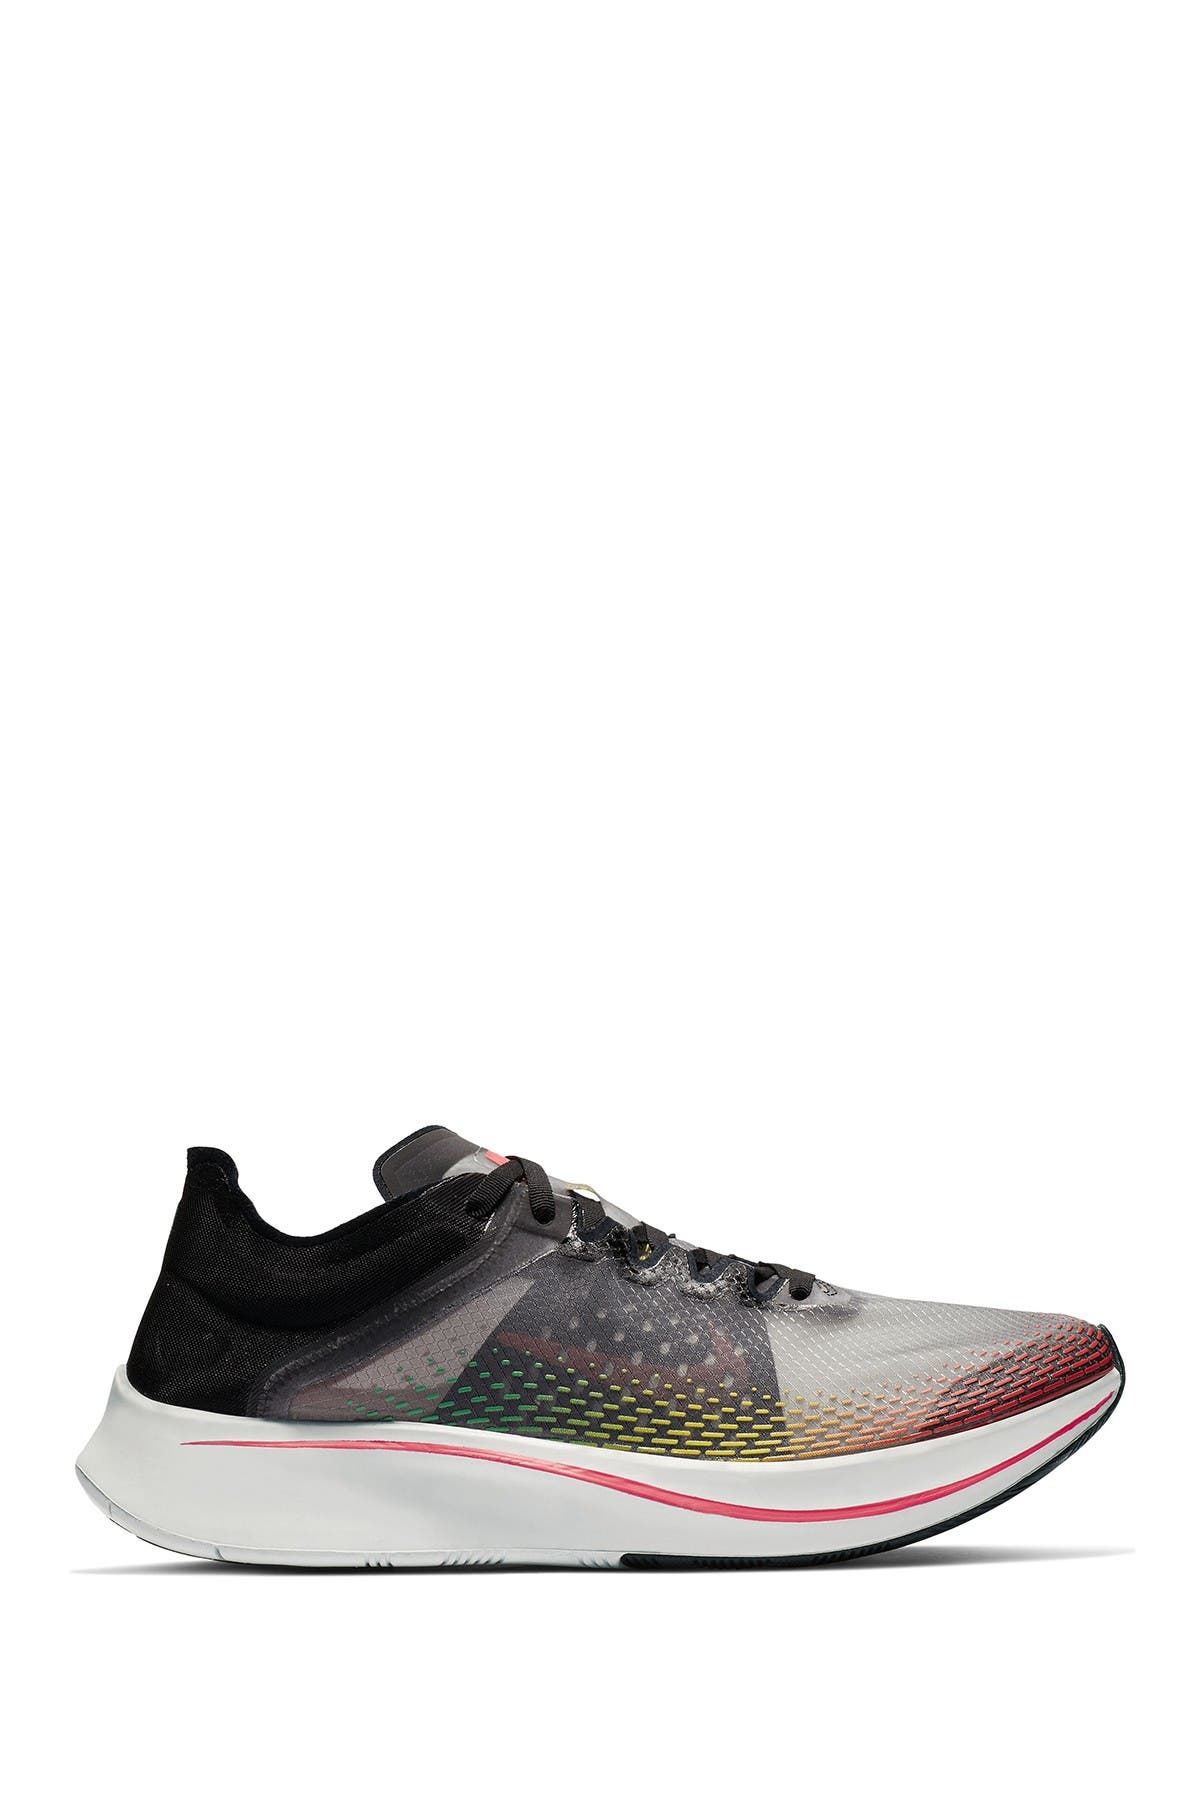 Nike | Zoom Fly SP Fast Running Shoe 